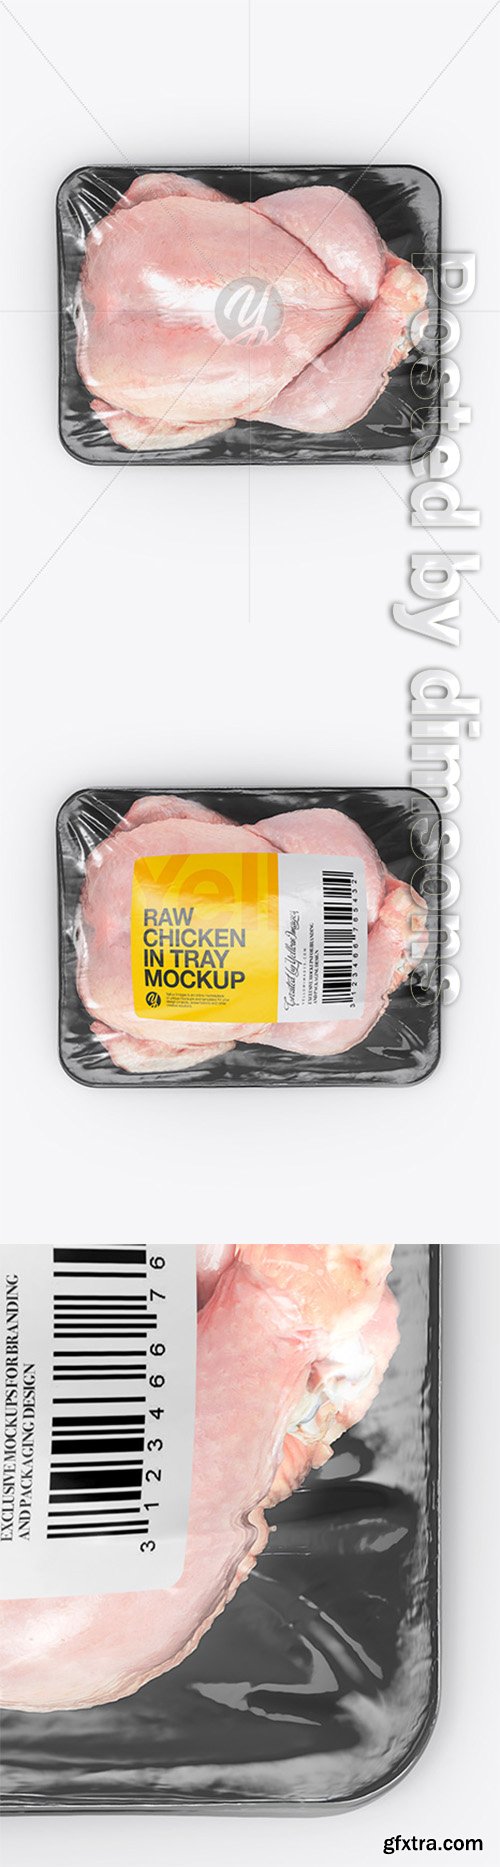 Tray With Raw Chicken Mockup - Top View 25171